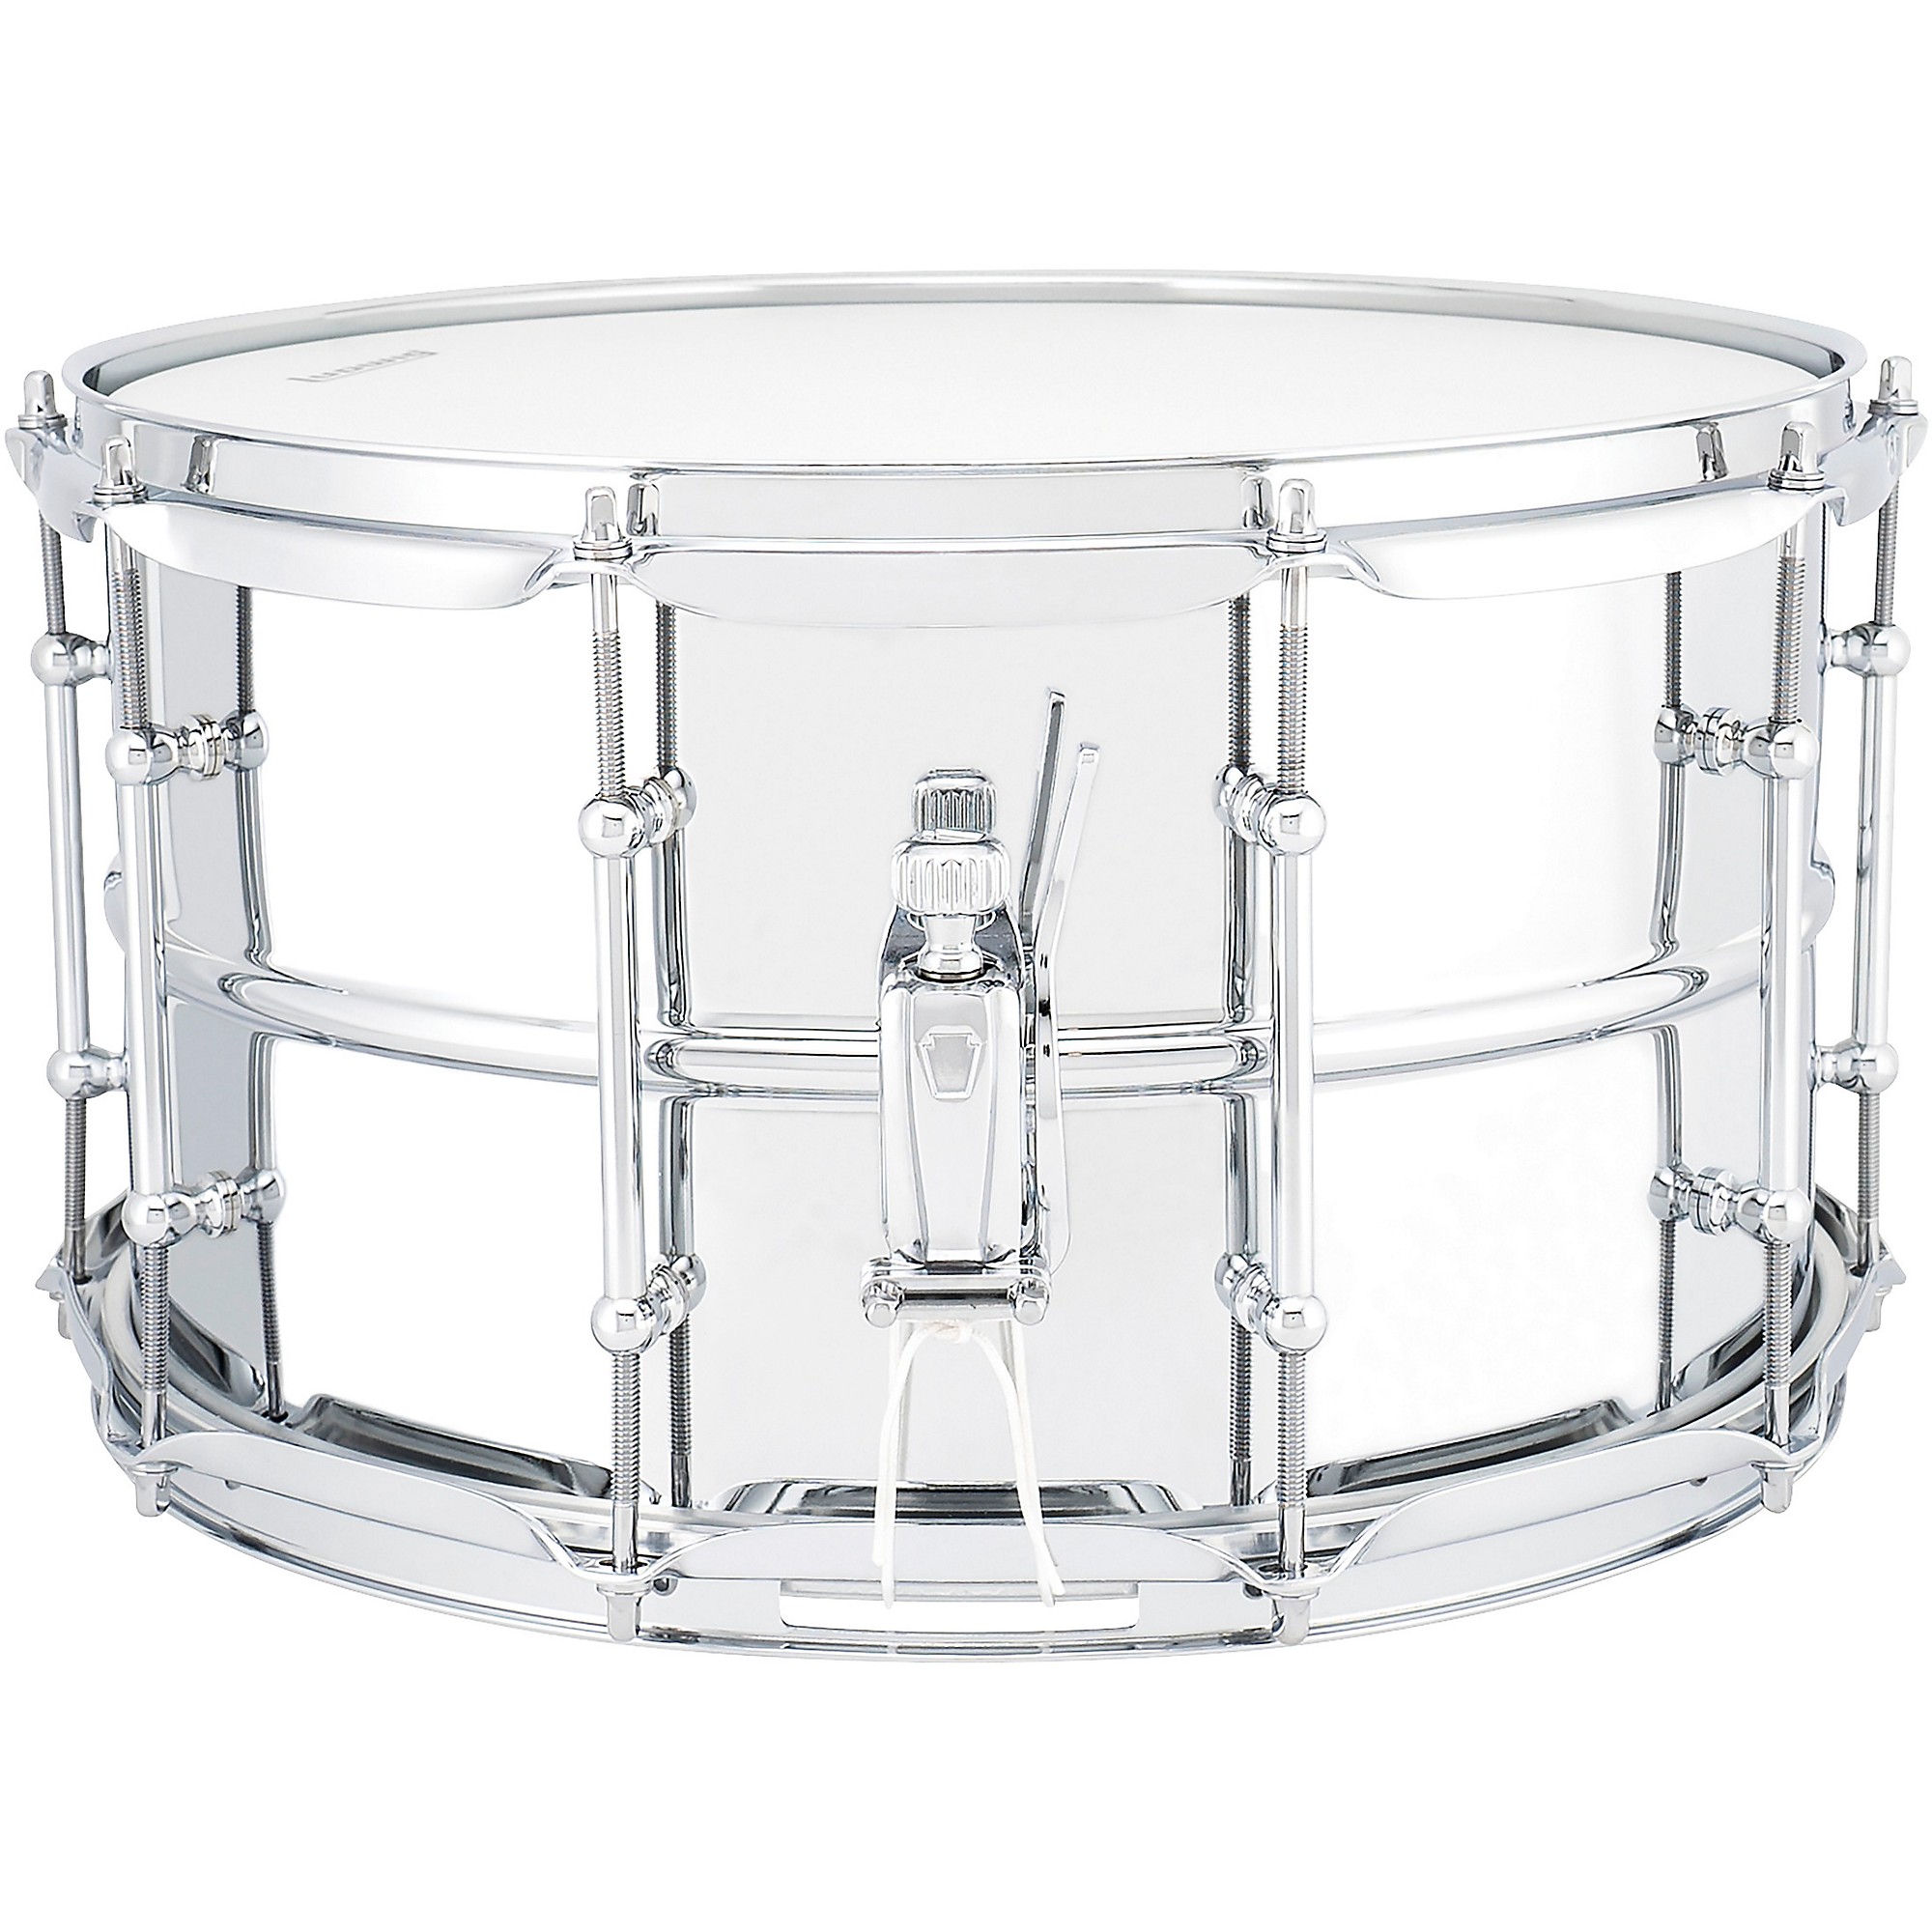 Ludwig Supralite Steel Snare Drum 14 x 8 in. | Guitar Center